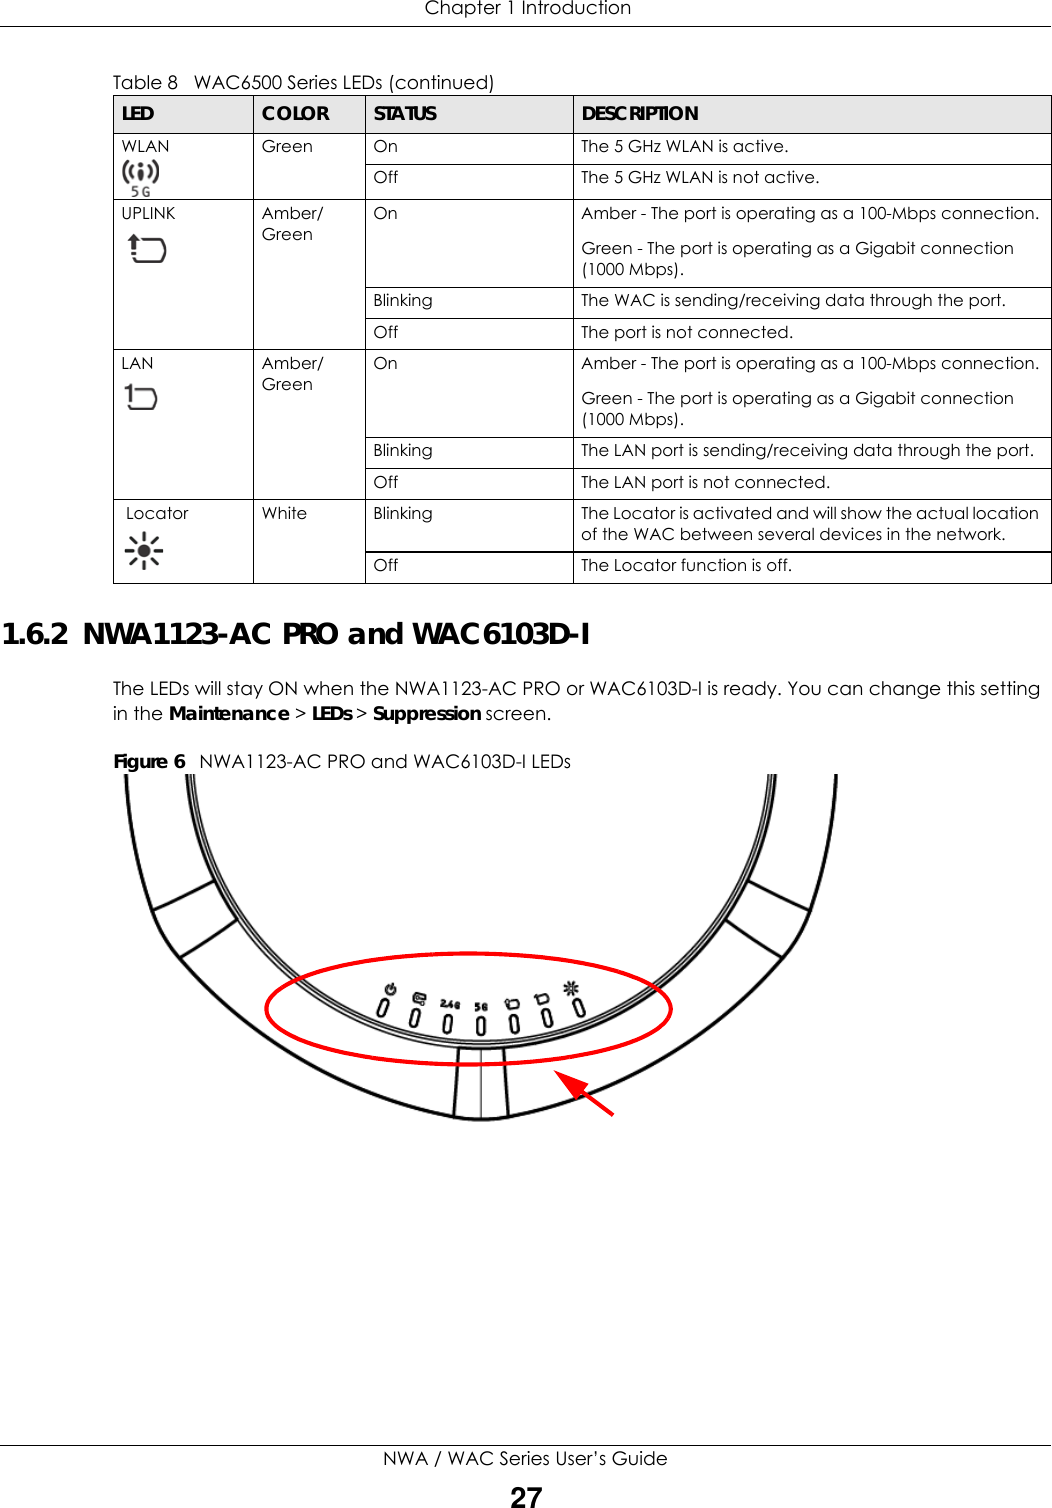  Chapter 1 IntroductionNWA / WAC Series User’s Guide271.6.2  NWA1123-AC PRO and WAC6103D-I The LEDs will stay ON when the NWA1123-AC PRO or WAC6103D-I is ready. You can change this setting in the Maintenance &gt; LEDs &gt; Suppression screen.Figure 6   NWA1123-AC PRO and WAC6103D-I LEDs   WLAN Green On The 5 GHz WLAN is active.Off The 5 GHz WLAN is not active.UPLINK Amber/GreenOn Amber - The port is operating as a 100-Mbps connection.Green - The port is operating as a Gigabit connection (1000 Mbps).Blinking The WAC is sending/receiving data through the port.Off The port is not connected.LAN Amber/GreenOn Amber - The port is operating as a 100-Mbps connection.Green - The port is operating as a Gigabit connection (1000 Mbps).Blinking The LAN port is sending/receiving data through the port.Off The LAN port is not connected. Locator White Blinking The Locator is activated and will show the actual location of the WAC between several devices in the network.Off The Locator function is off.Table 8   WAC6500 Series LEDs (continued)LED COLOR STATUS DESCRIPTION